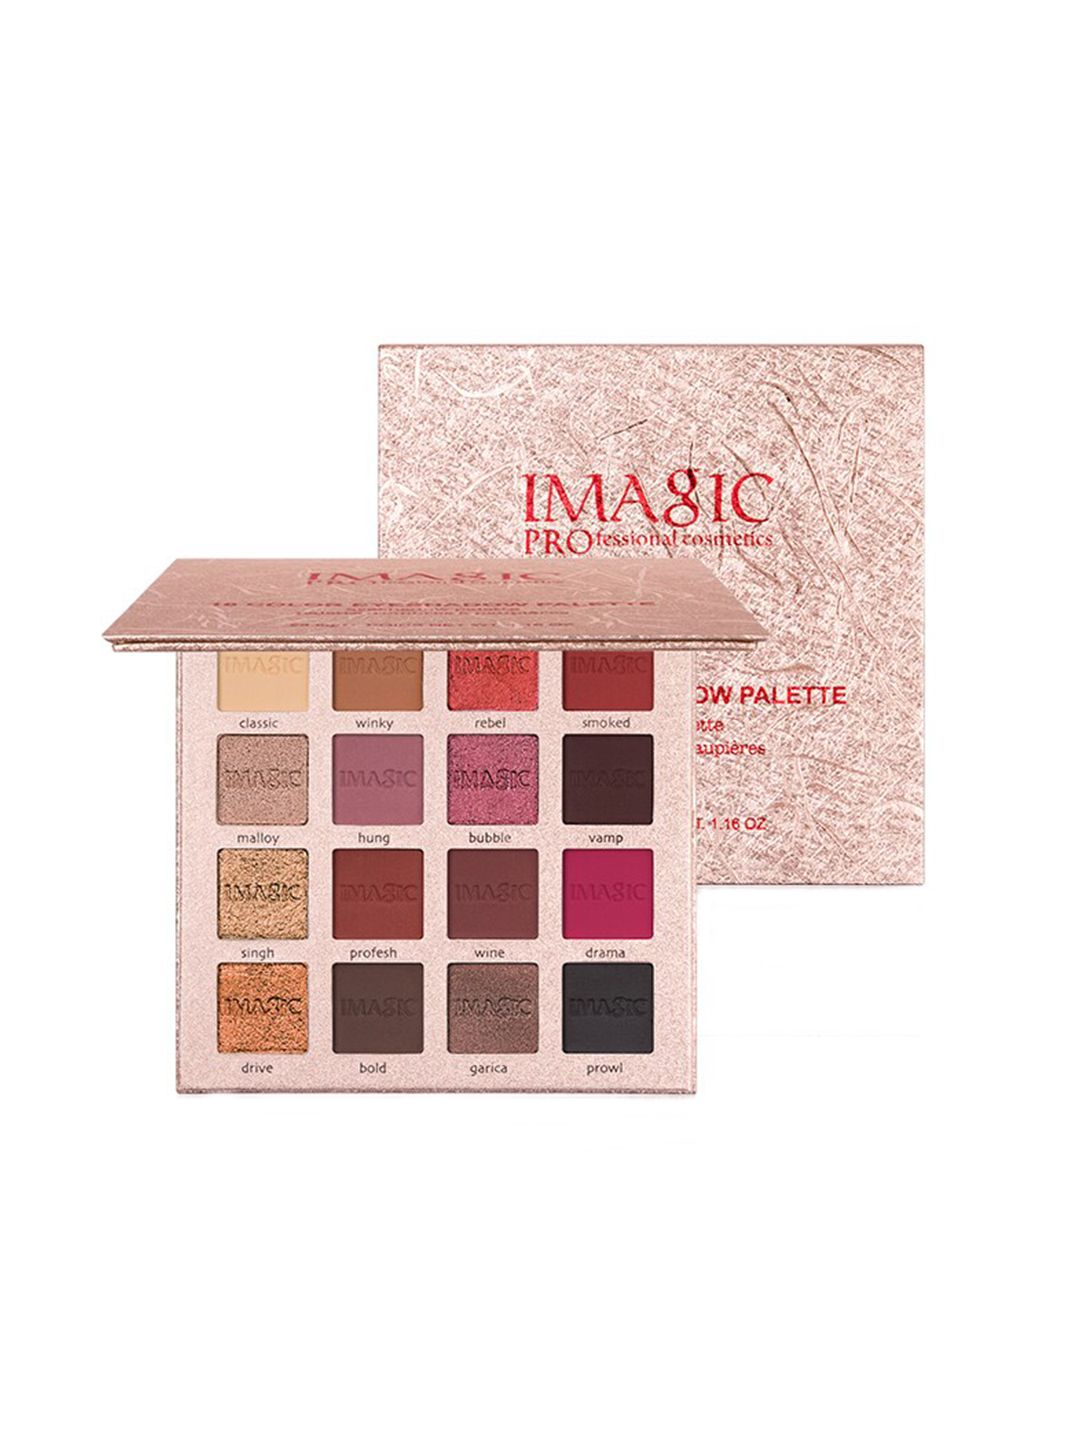 IMAGIC Professional Cosmetics Charm 16 Color Eyeshadow Palette - Shade EY318 Price in India